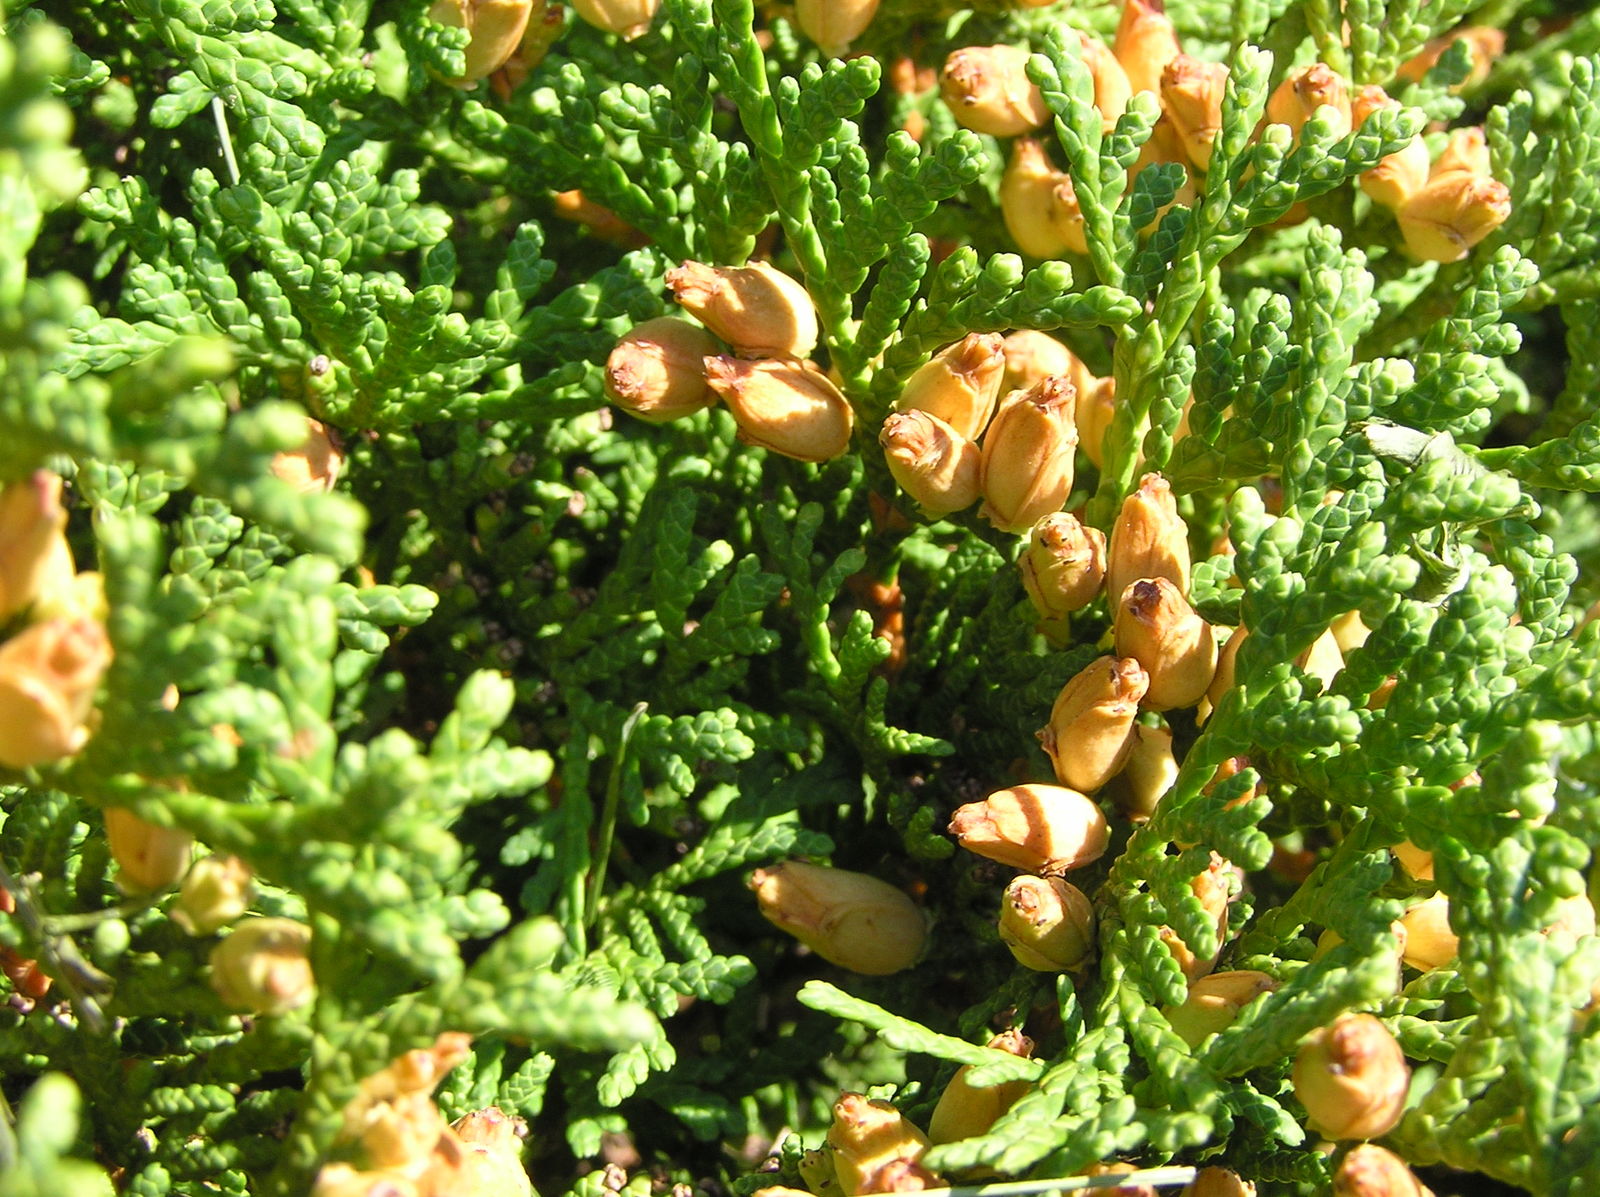 thuja occidentalis l. | plants of the world online | kew science